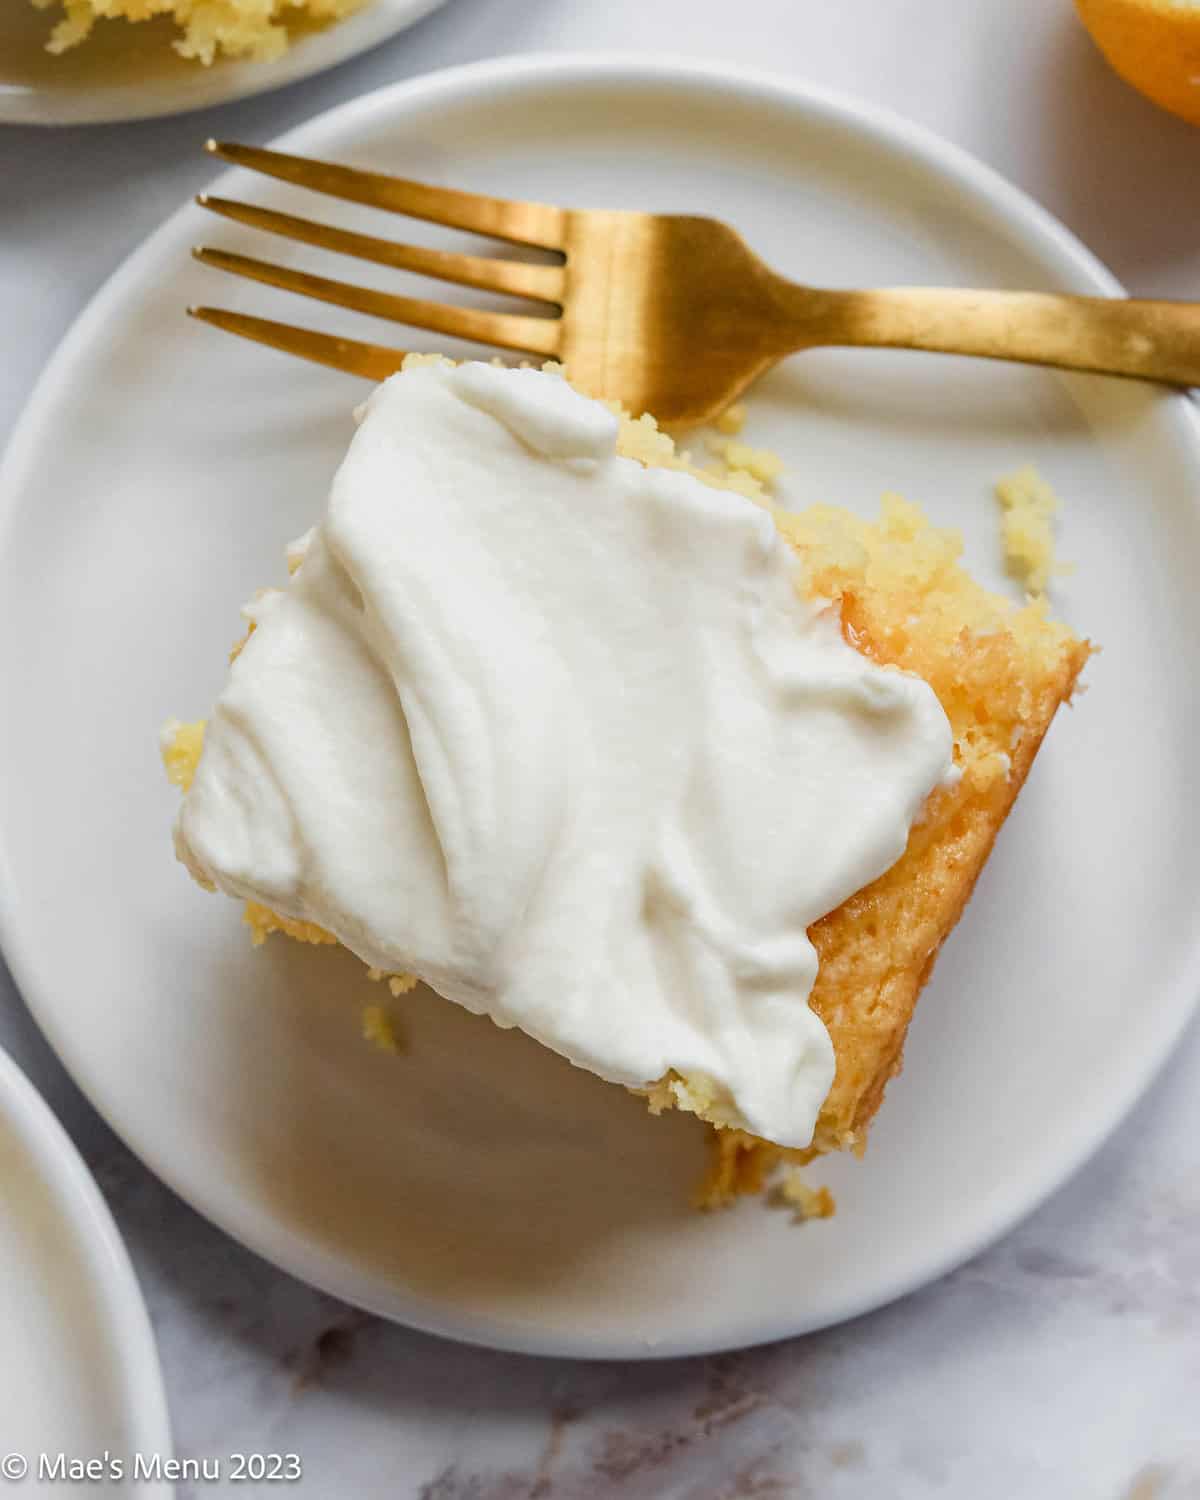 A slice of lemon poke cake on a small white plate with a fork.